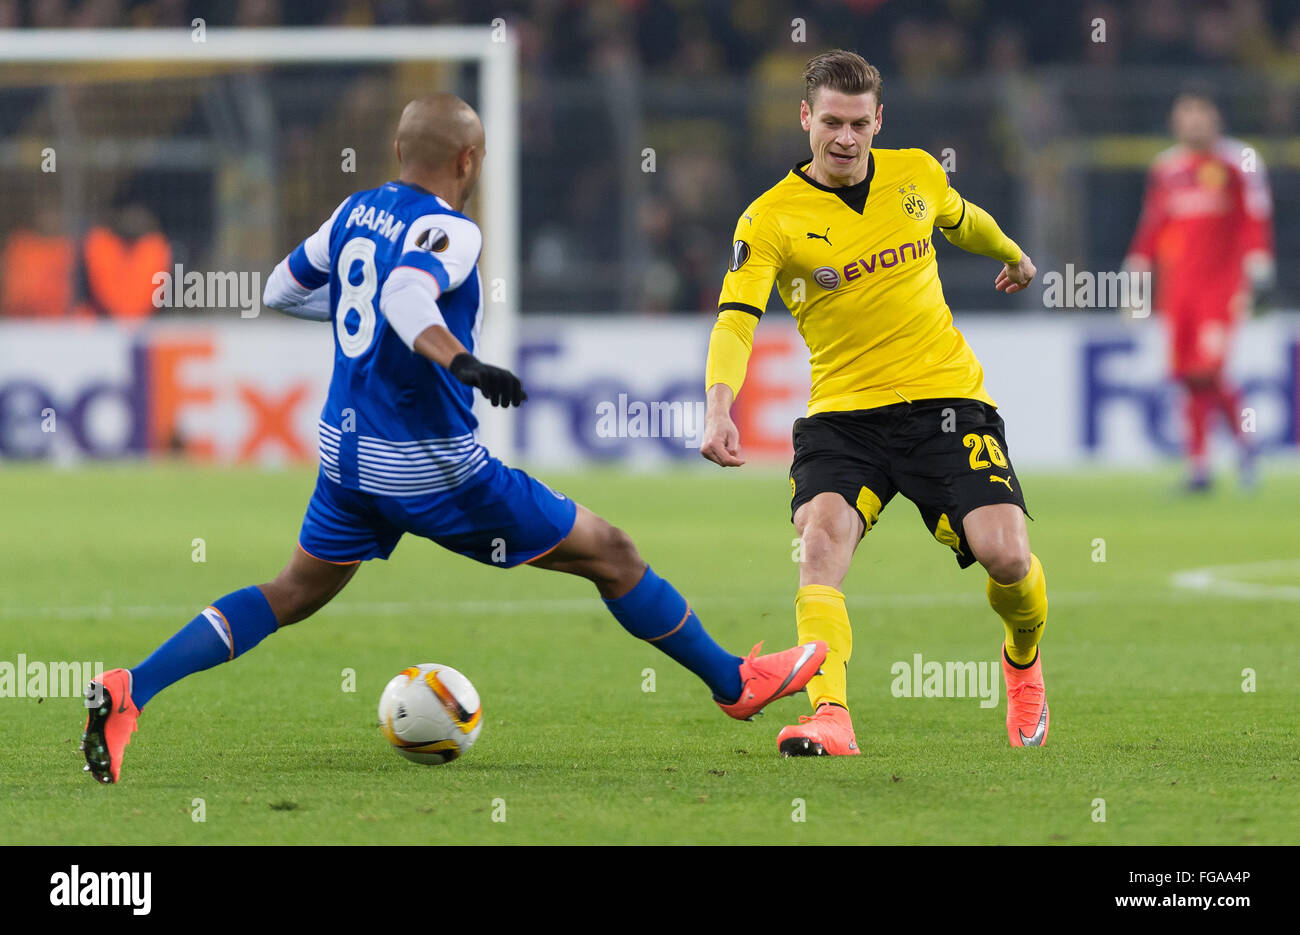 Dortmund's Lukasz Piszczek (r) and Porto's Yacine Brahimi (l) fighting for the ball during the UEFA Europa League knockout match between Borussia Dortmund and FC Porto in the Signal Iduna Park in Dortmund, Germany, 18 February 2016. PHOTO: GUIDO KIRCHNER/dpa Stock Photo